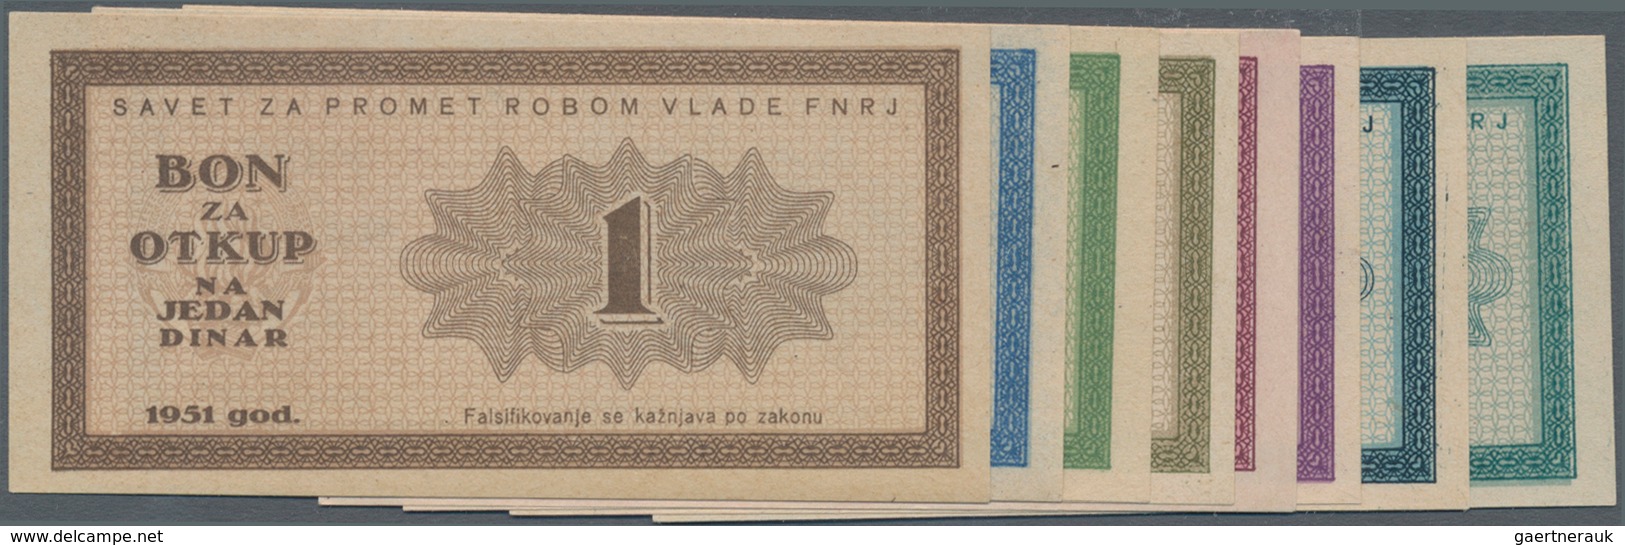 Yugoslavia / Jugoslavien: Huge lot with 33 regional and local issues, comprising 1, 10 and 100 Dinar